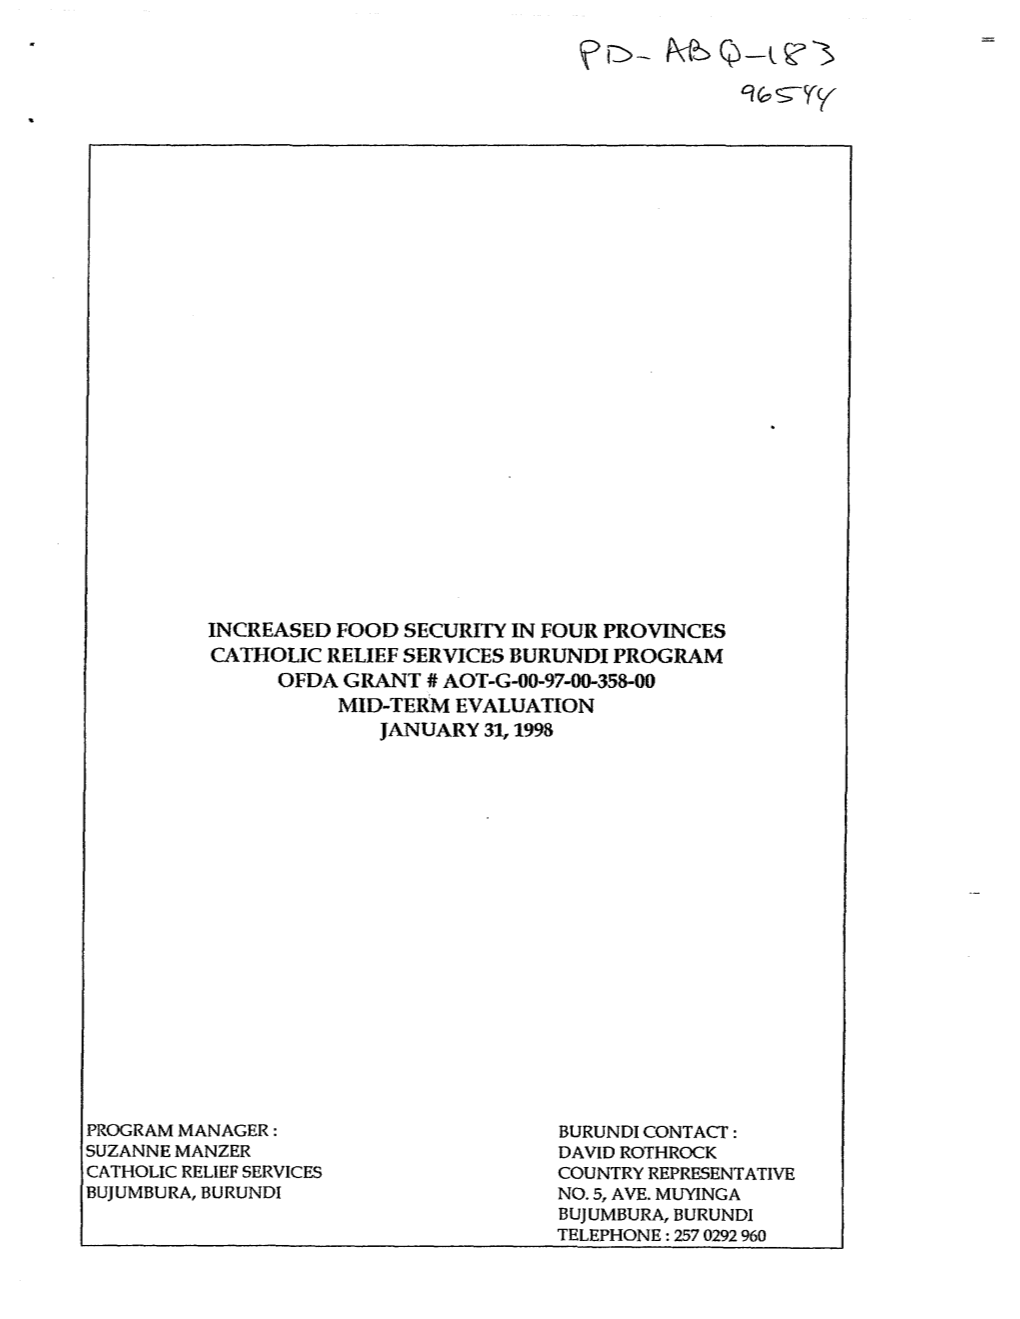 Increased Food Security in Four Provinces Catholic Relief Services Burundi Program Ofda Grant # Aot-G-00-97-00-358-00 Mid-Term Evaluation January 31,1998